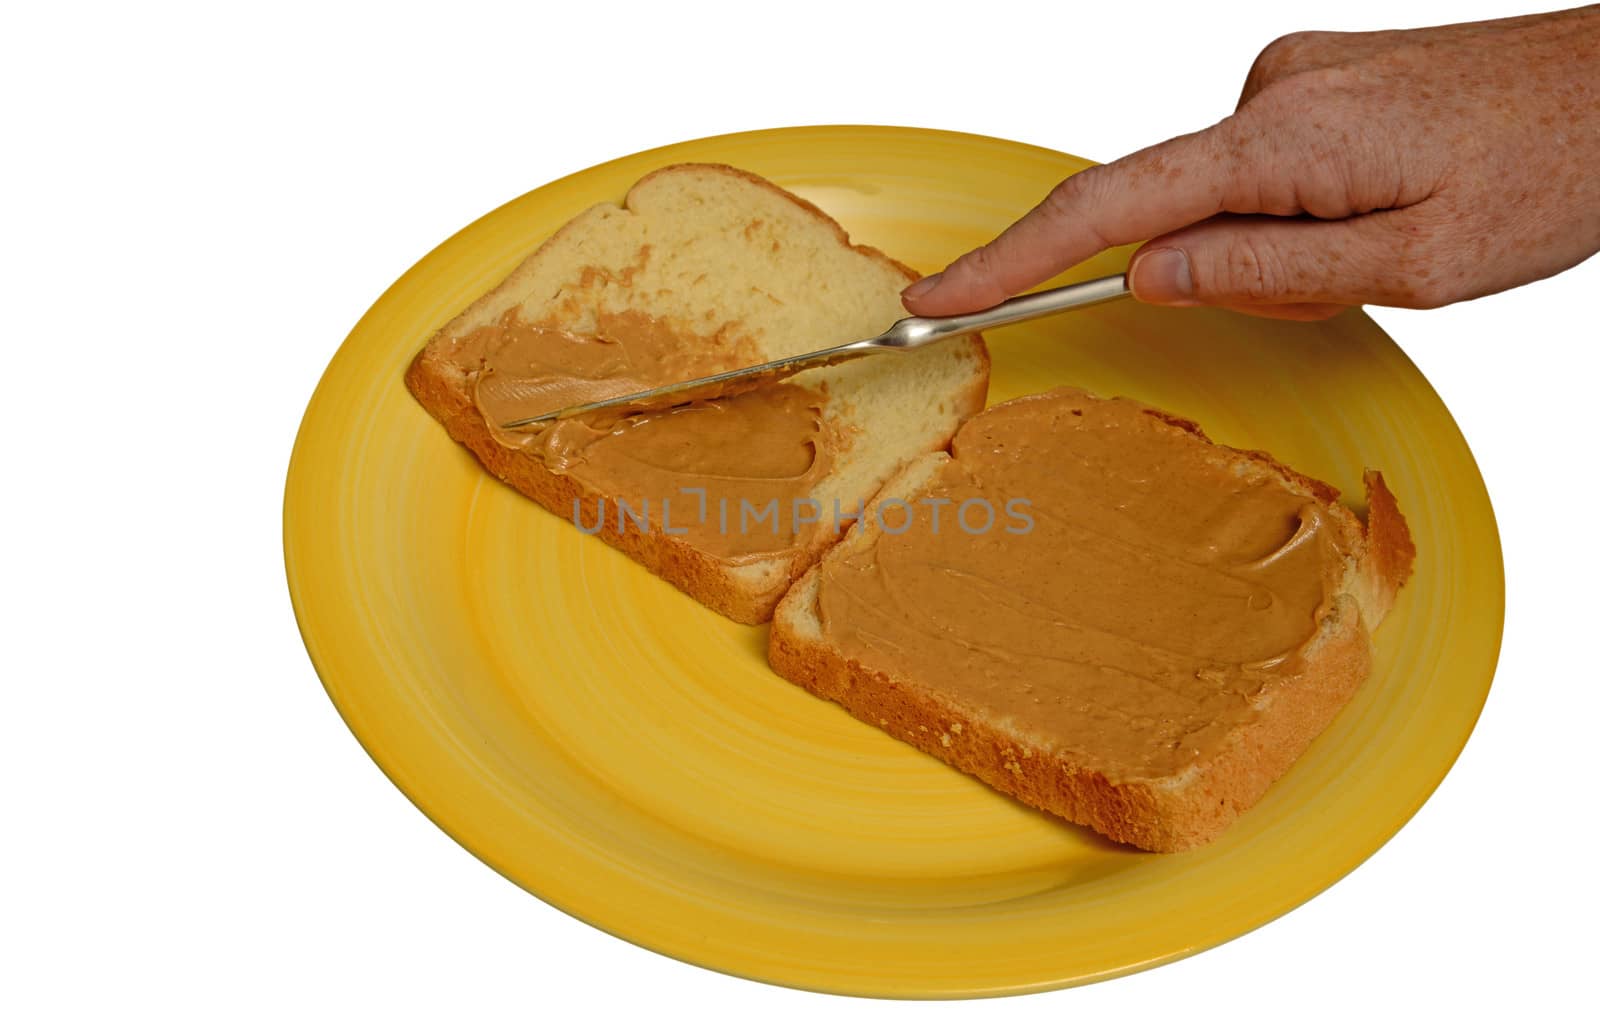 making a sandwich and spreading peanut butter on bread with knife